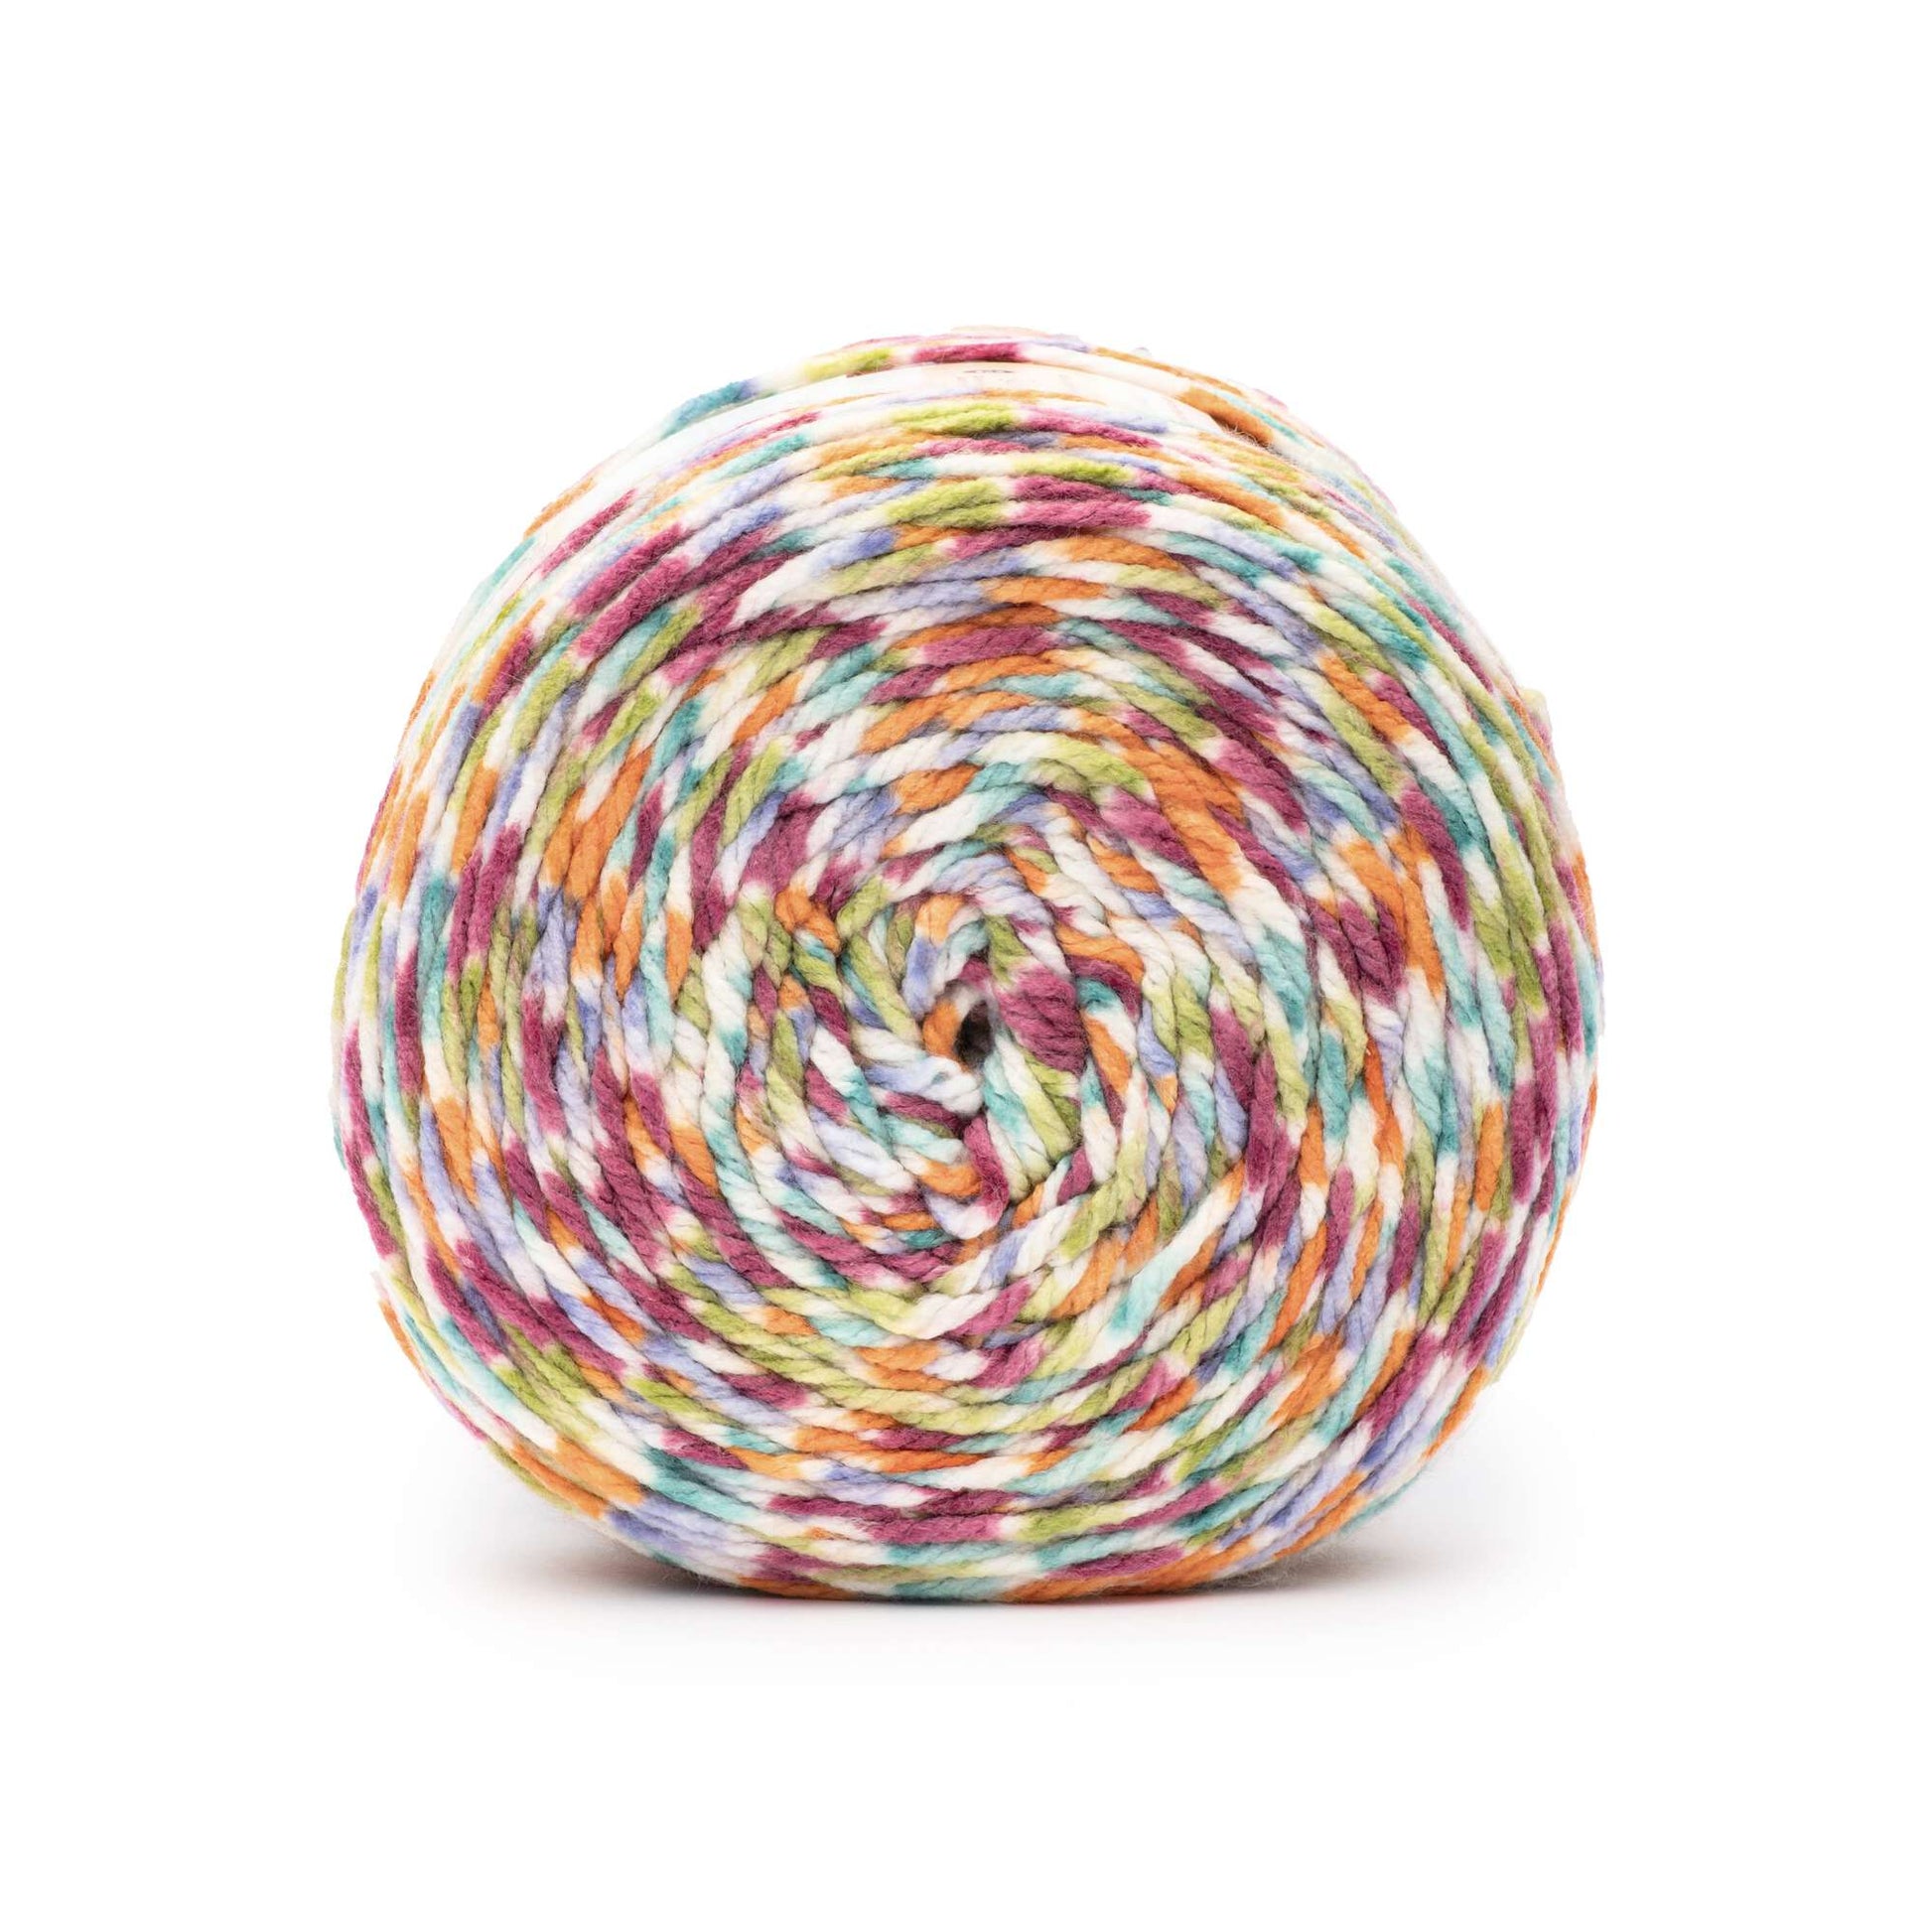 Caron Anniversary Cakes Yarn (1000g/35.3oz) - Clearance Shades Sweet And Sour Dot